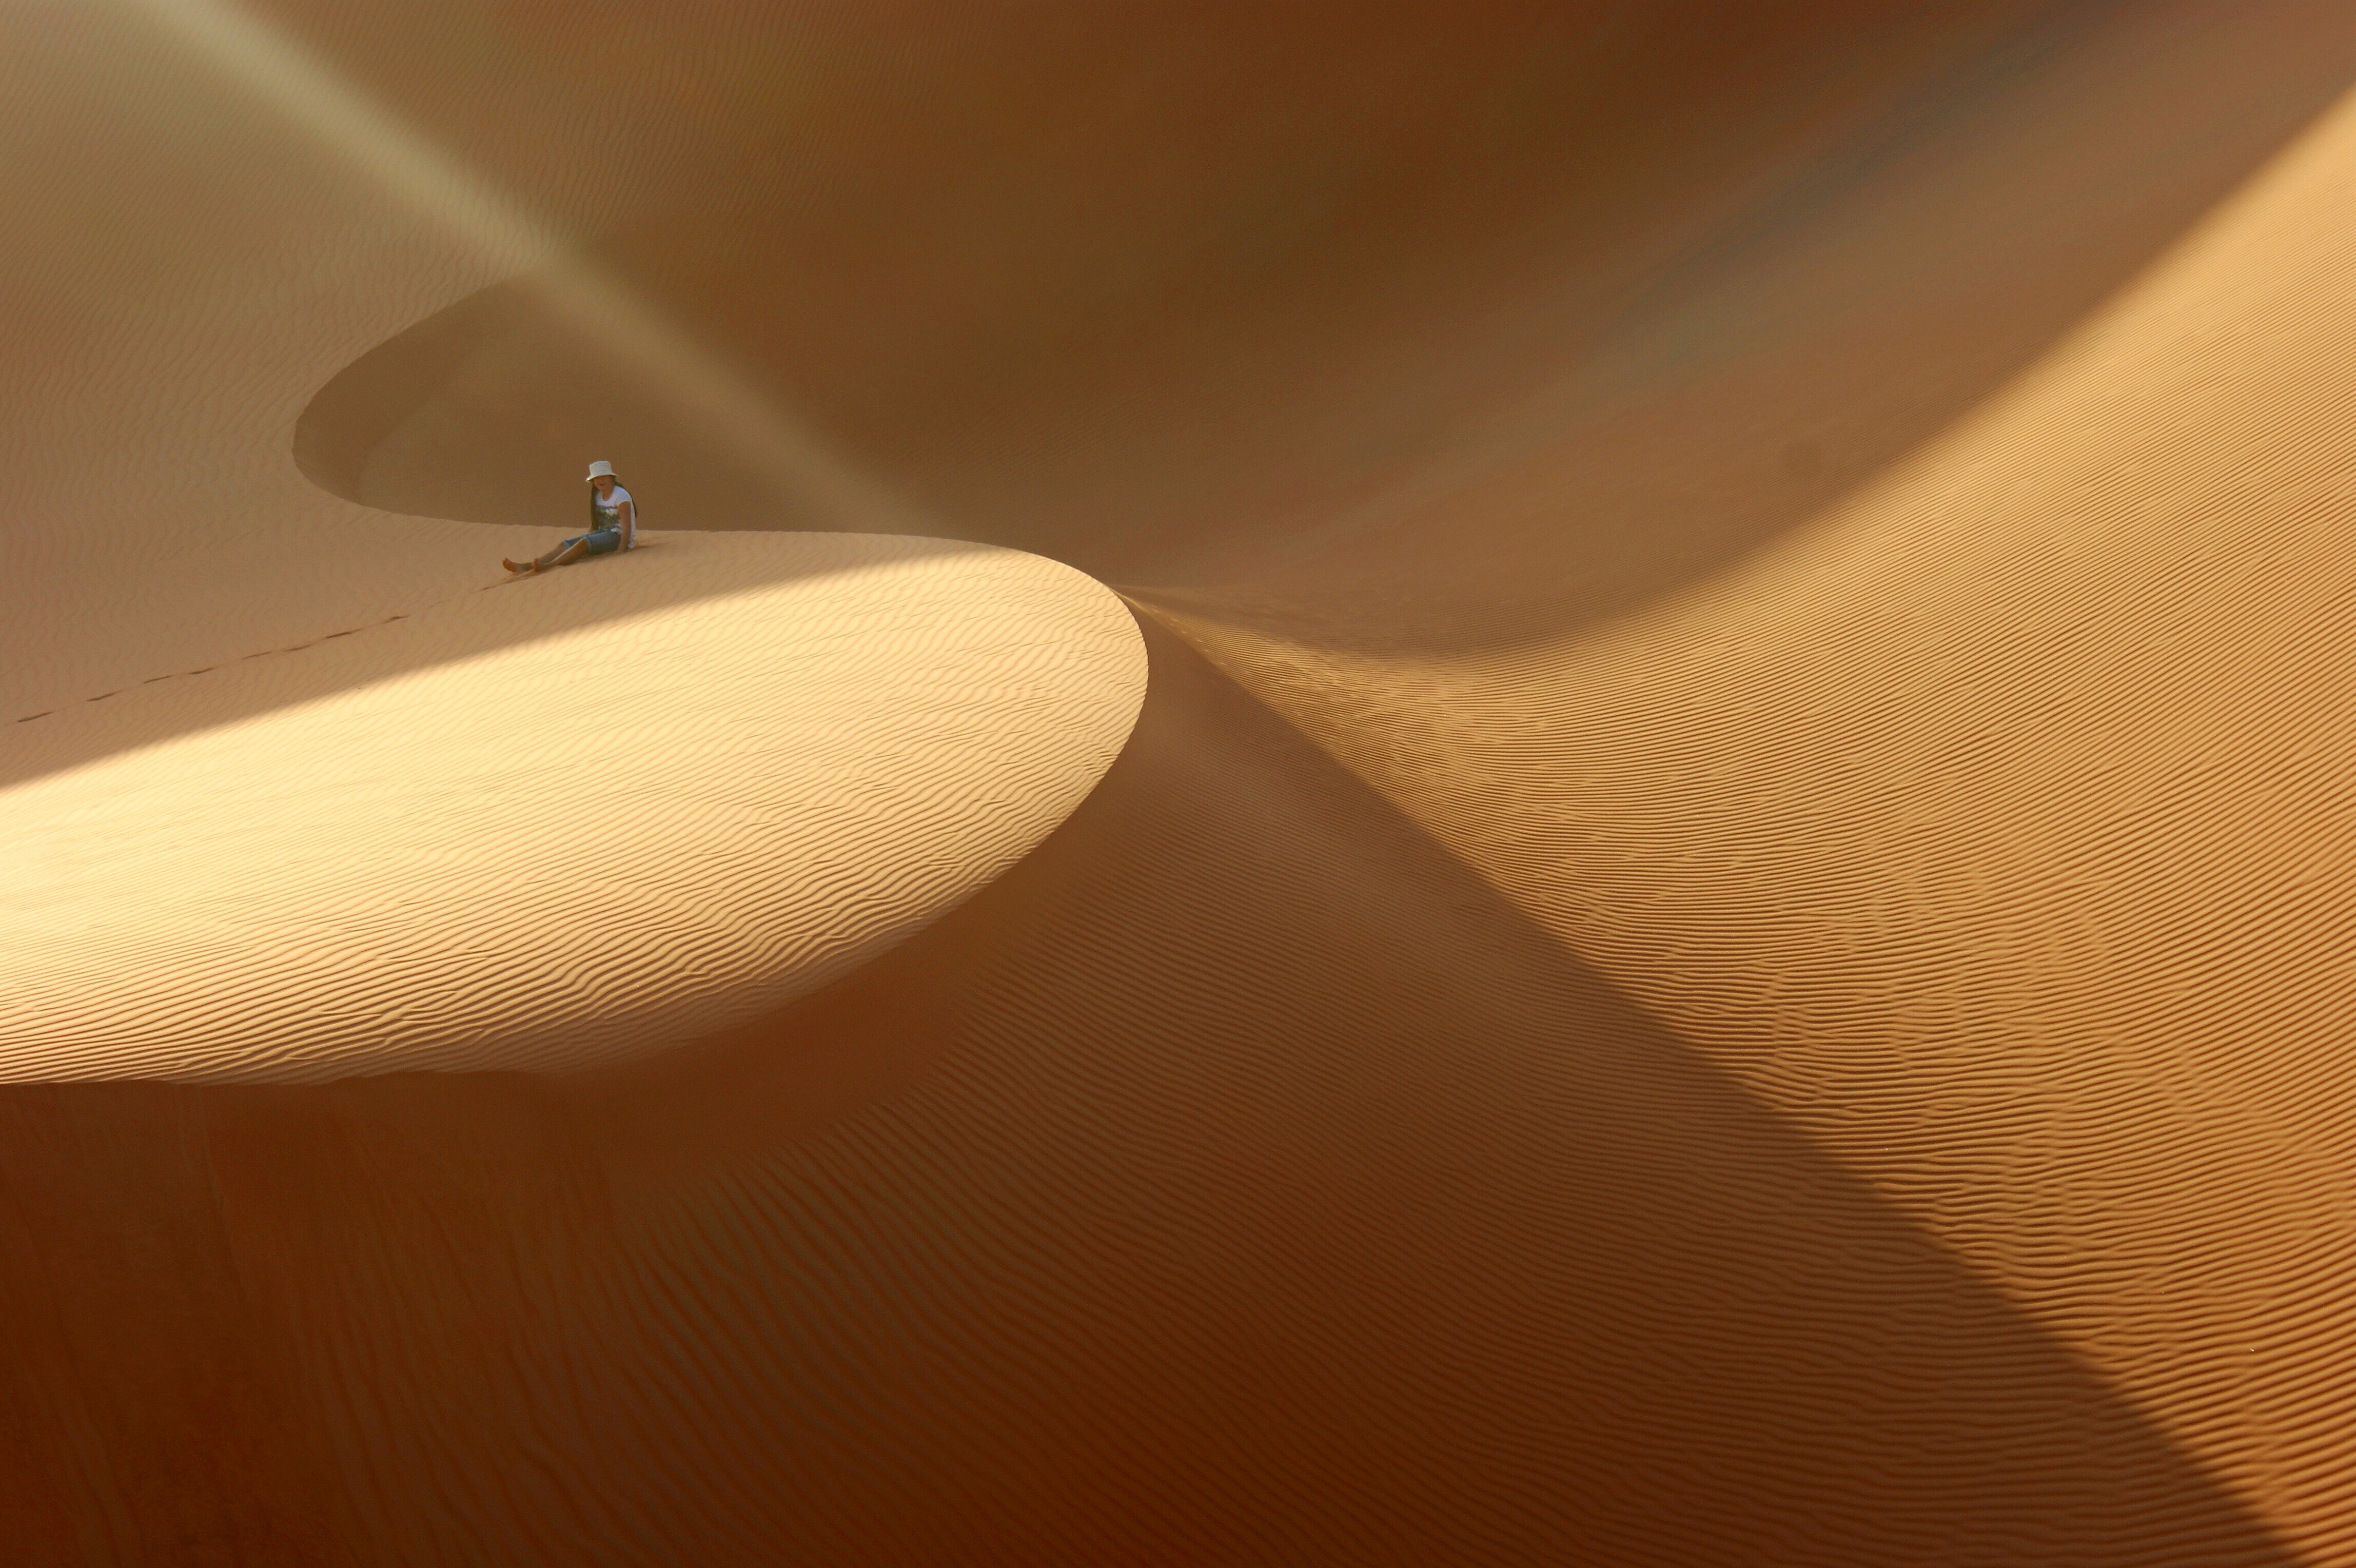 Serena and the dune